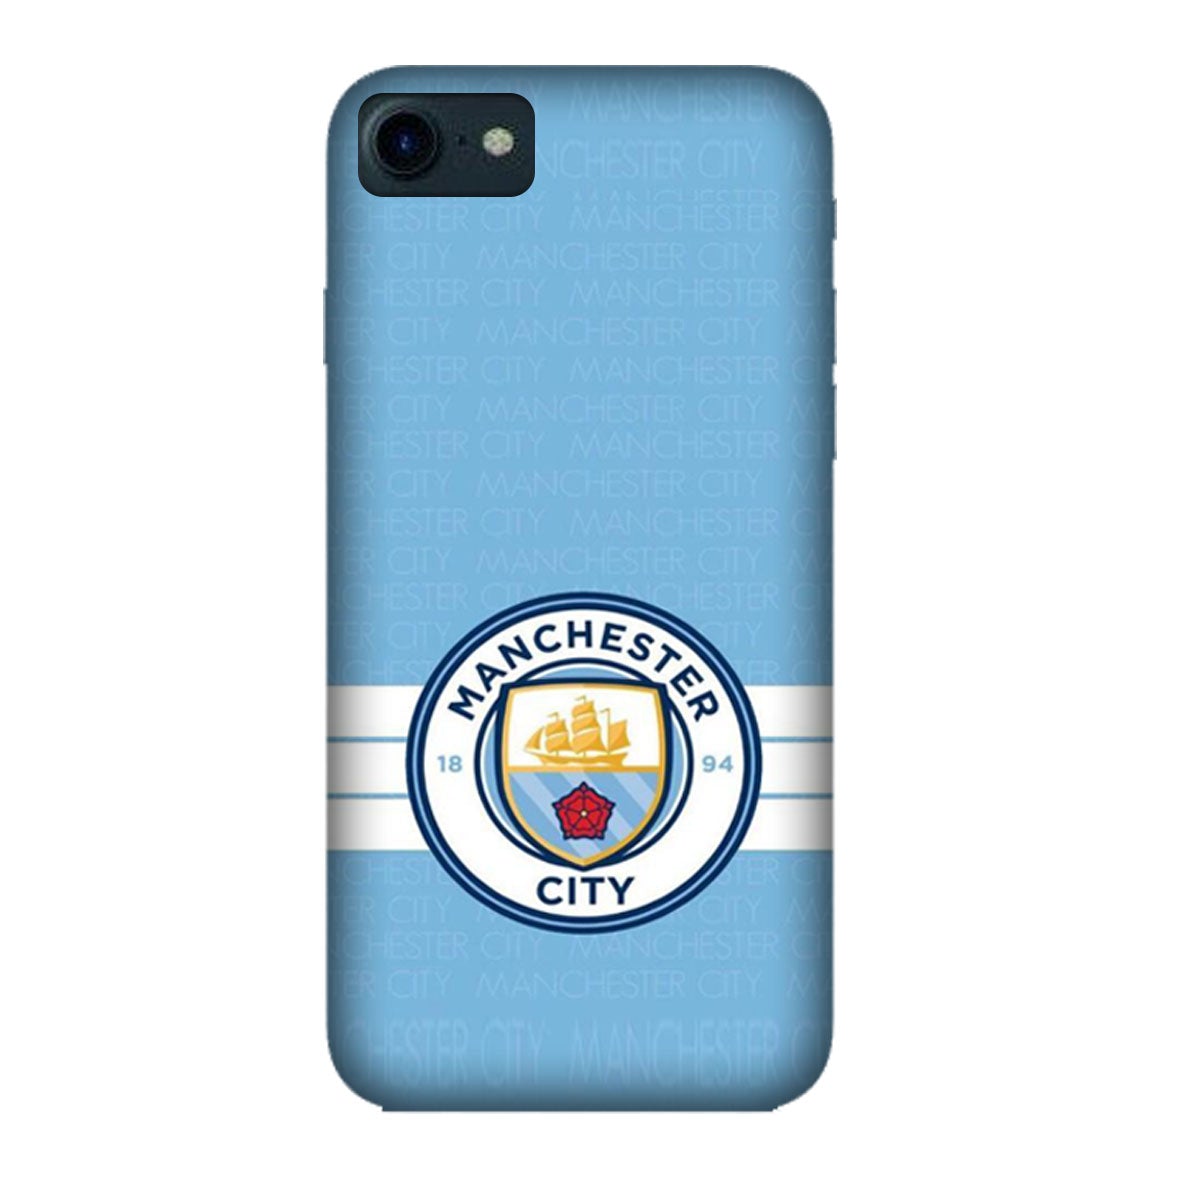 Manchester City - Mobile Phone Cover - Hard Case